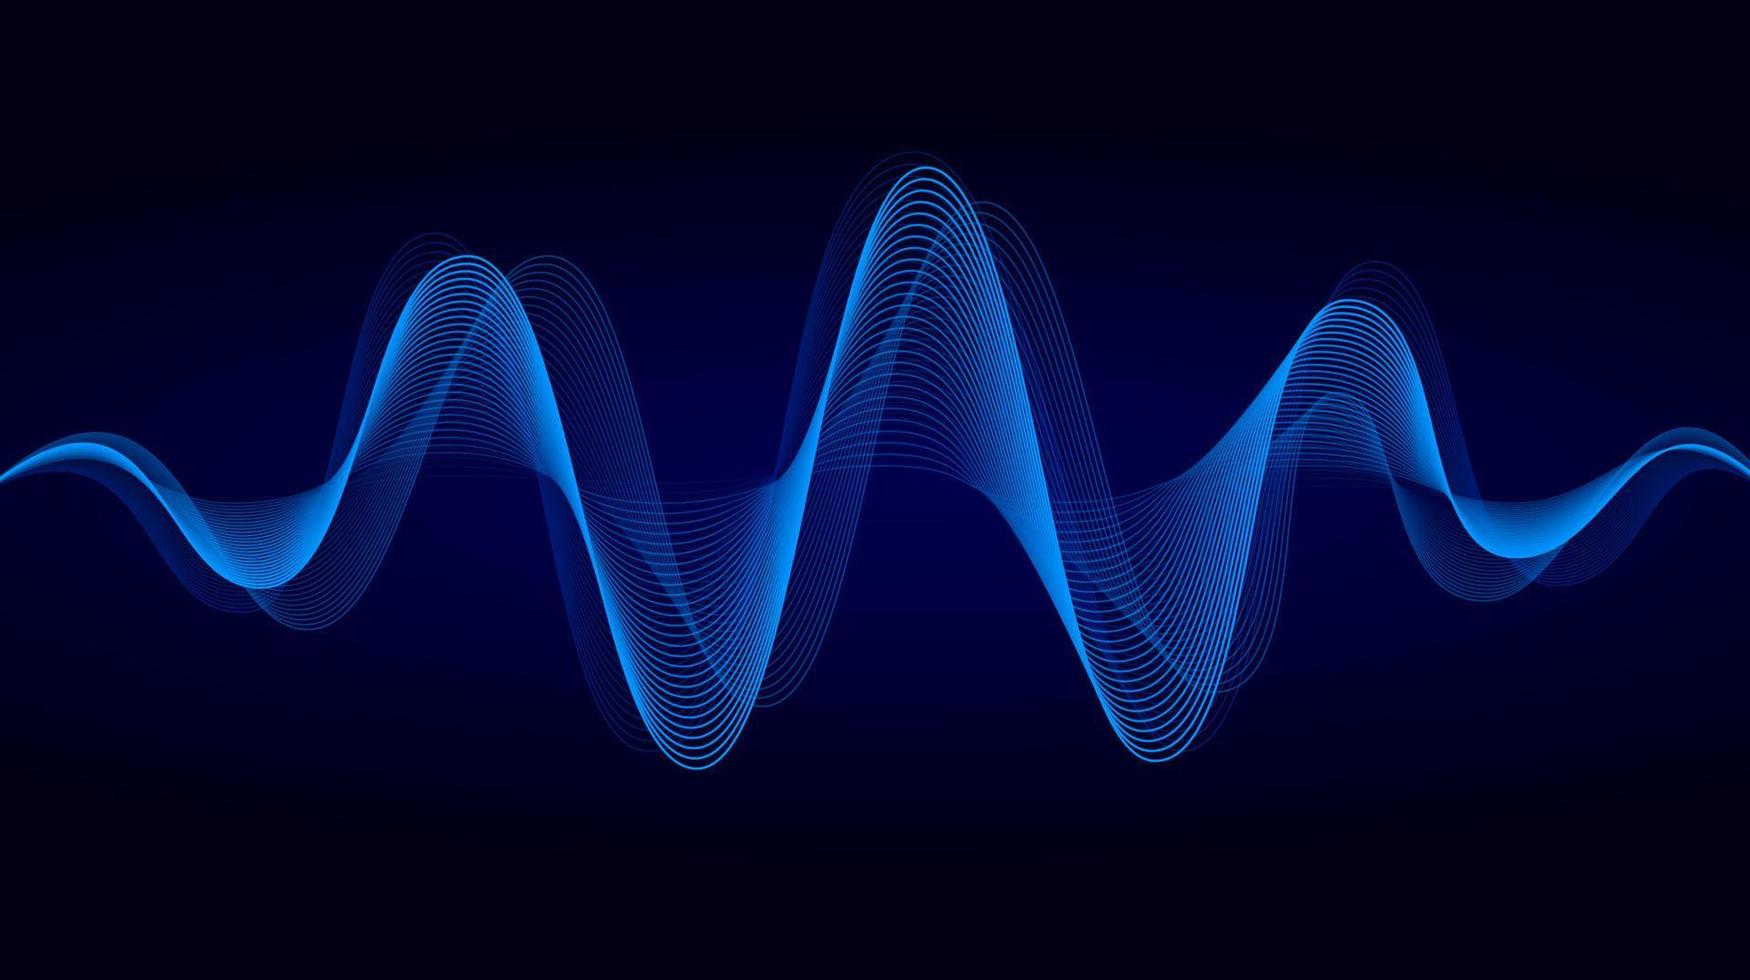 Abstract blue dynamic flowing lines light design. Sound wave background. Vector illustration of music, technology concept